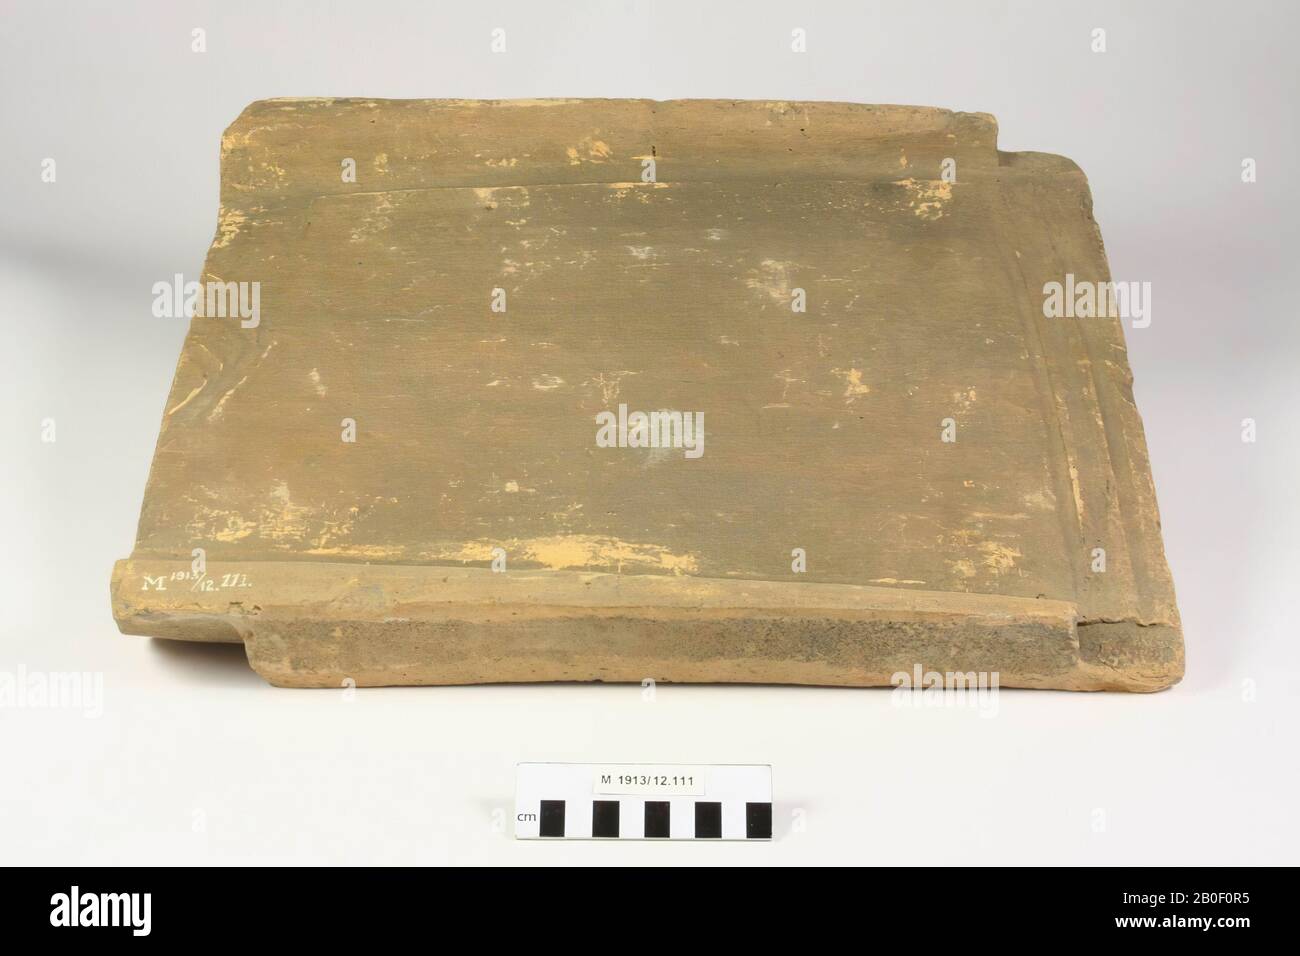 Large roof tile with which a grave has been constructed., Roof tile (tegula), earthenware, brick, 5,2 x 36,3 x 46 cm, roman, Germany, unknown, unknown, Rheinzabern Stock Photo